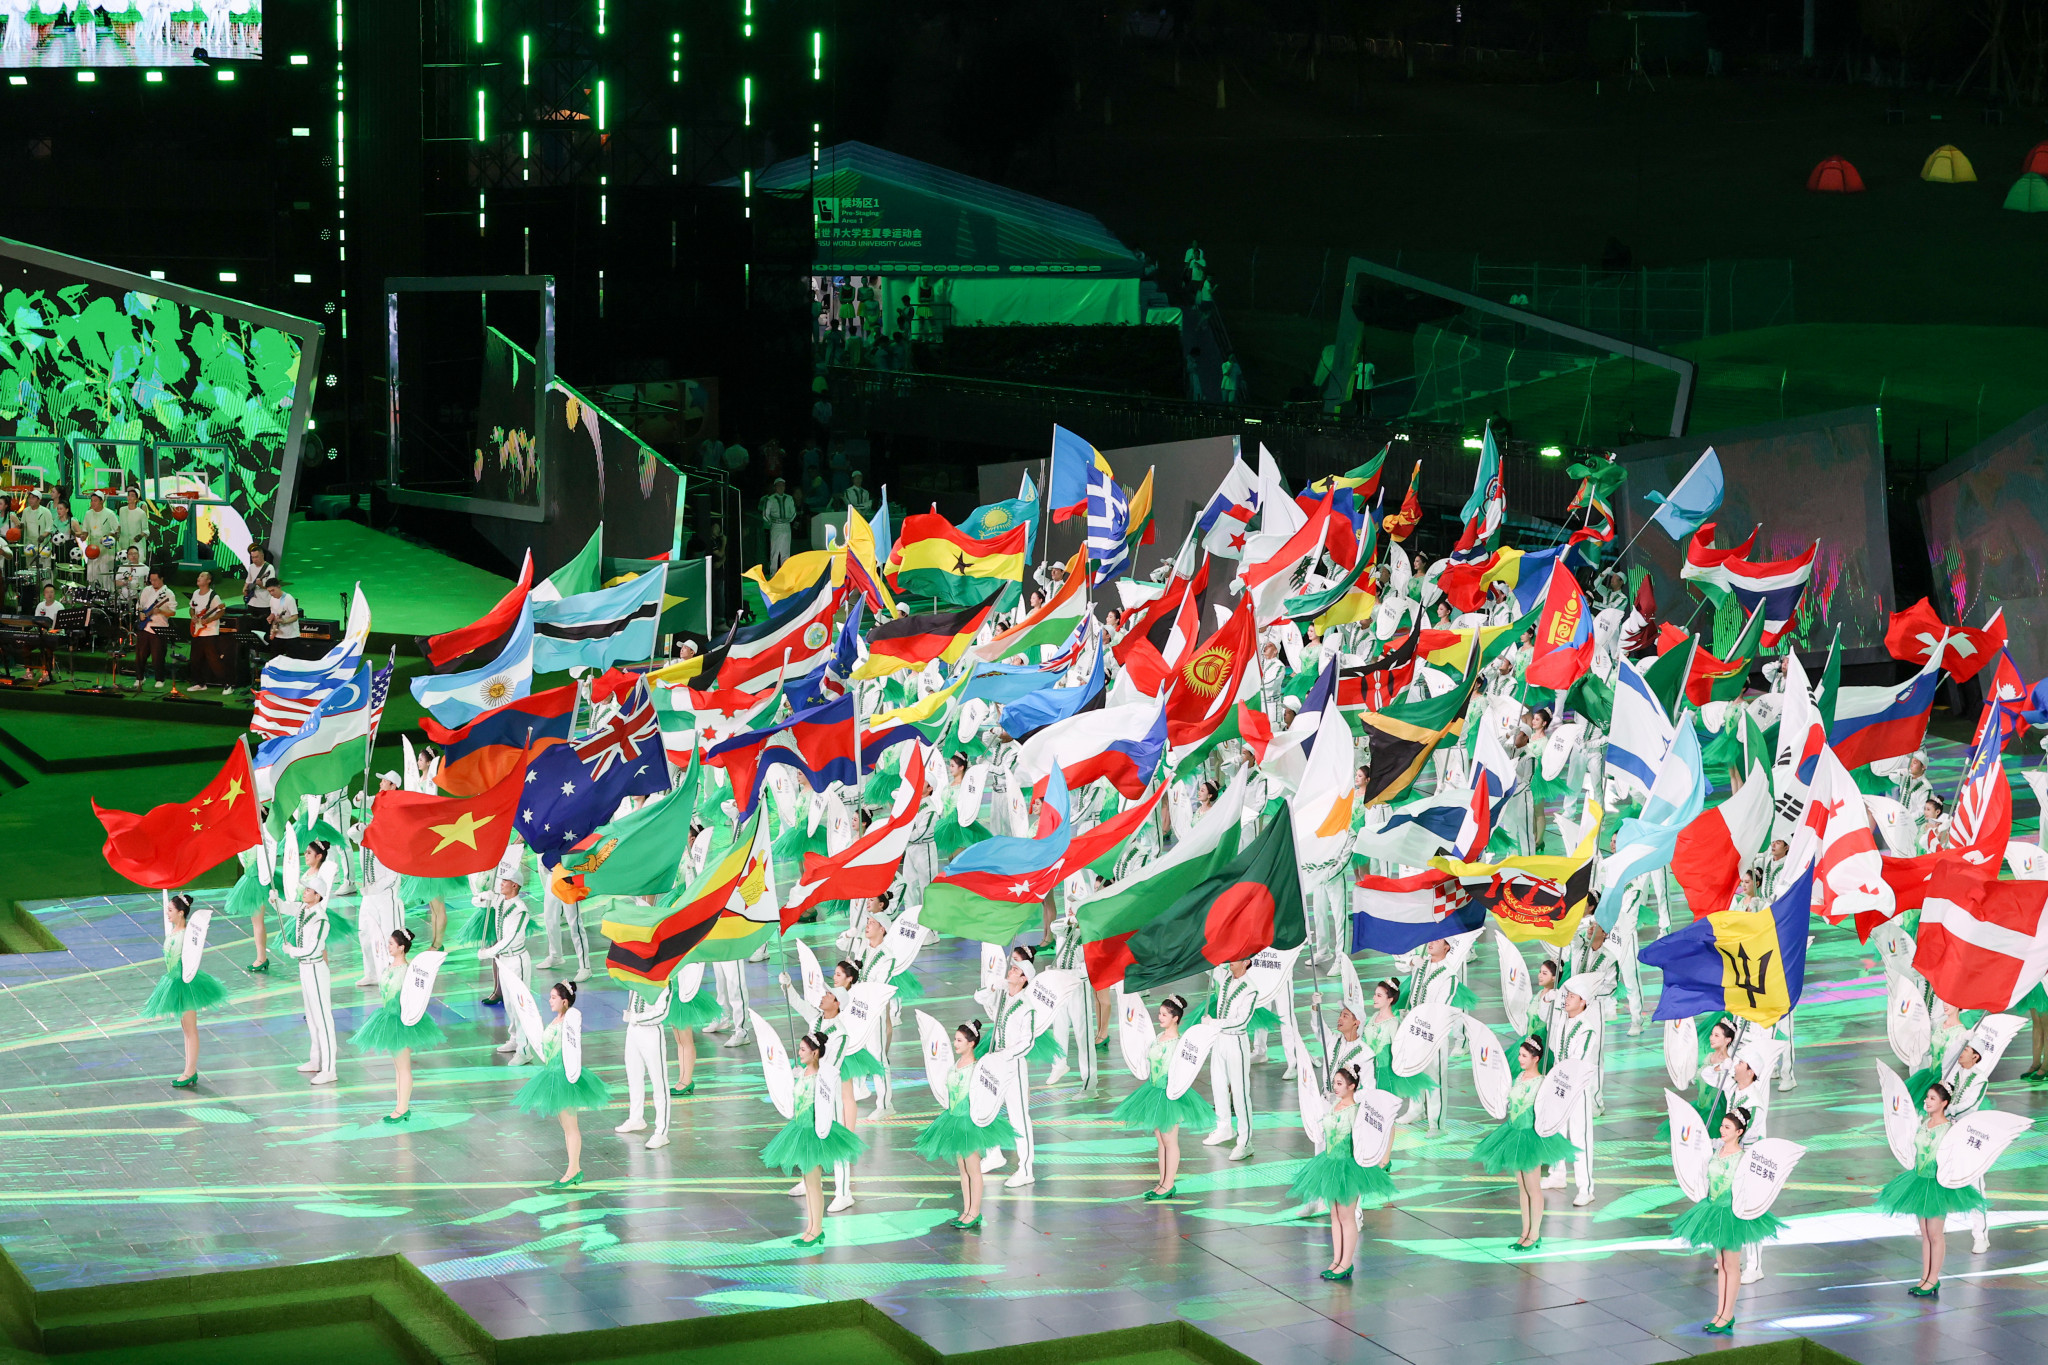 The flags of the participating nations arrive into the arena during the Closing Ceremony ©FISU